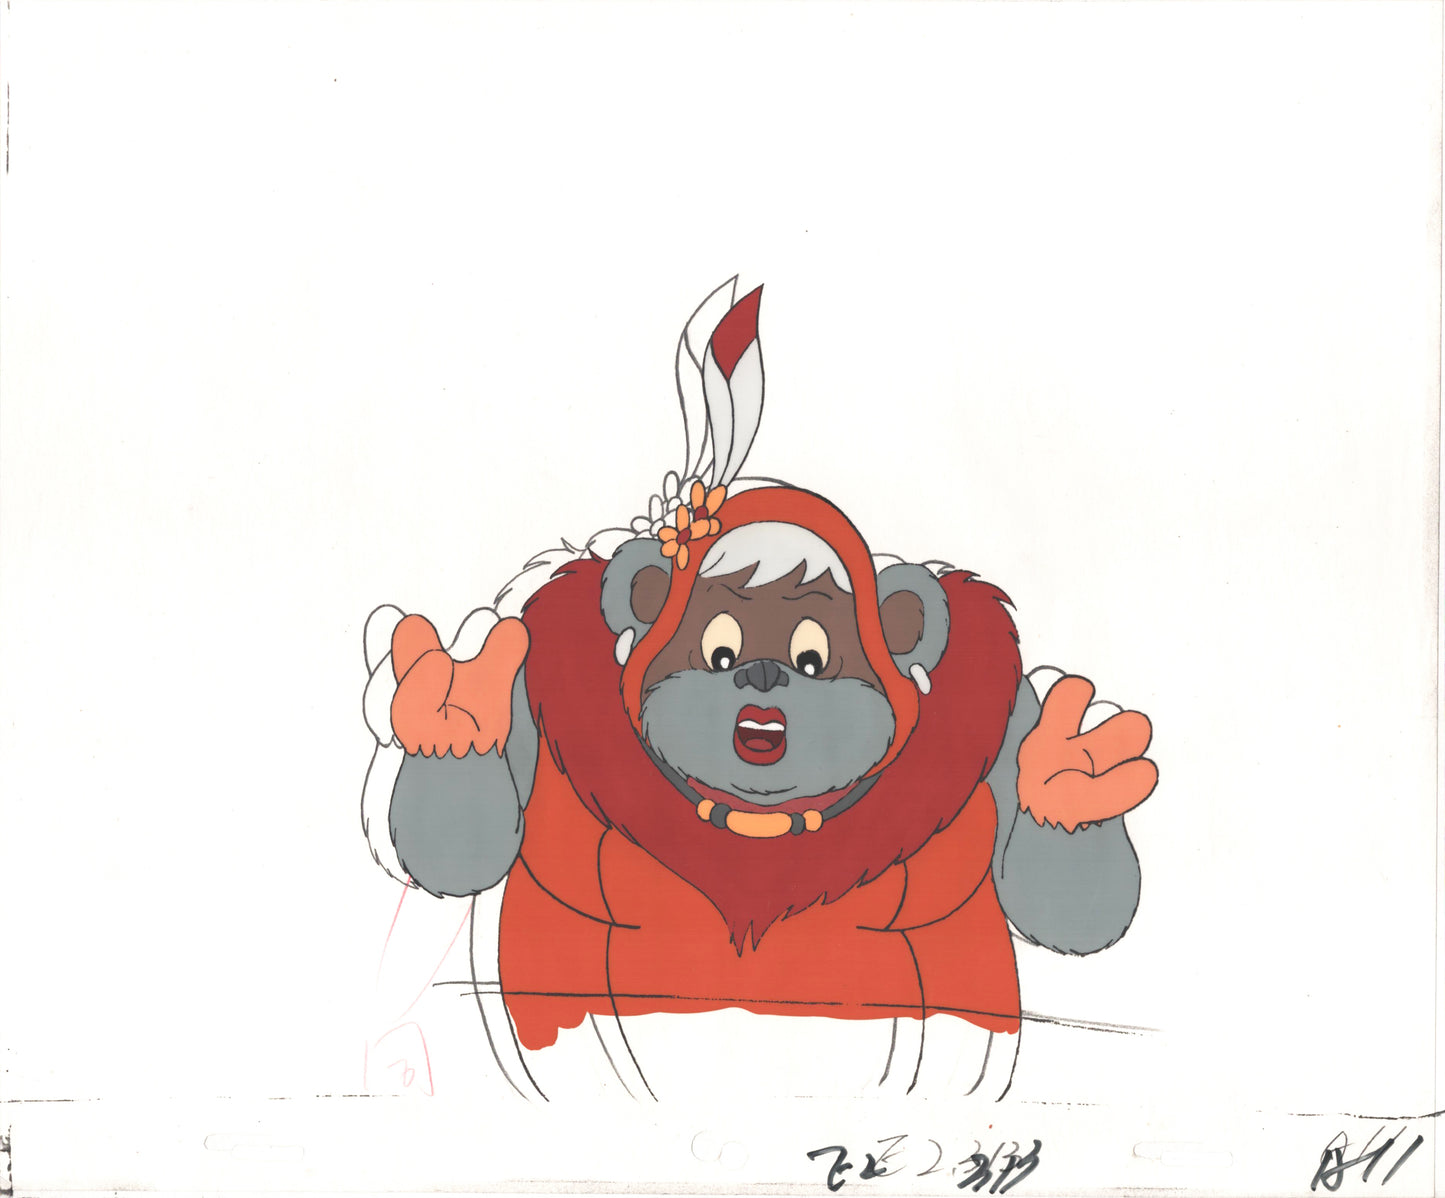 Star Wars: Ewoks Original Production Animation Cel and Drawing (drawing is stuck) from Lucasfilm C-A11